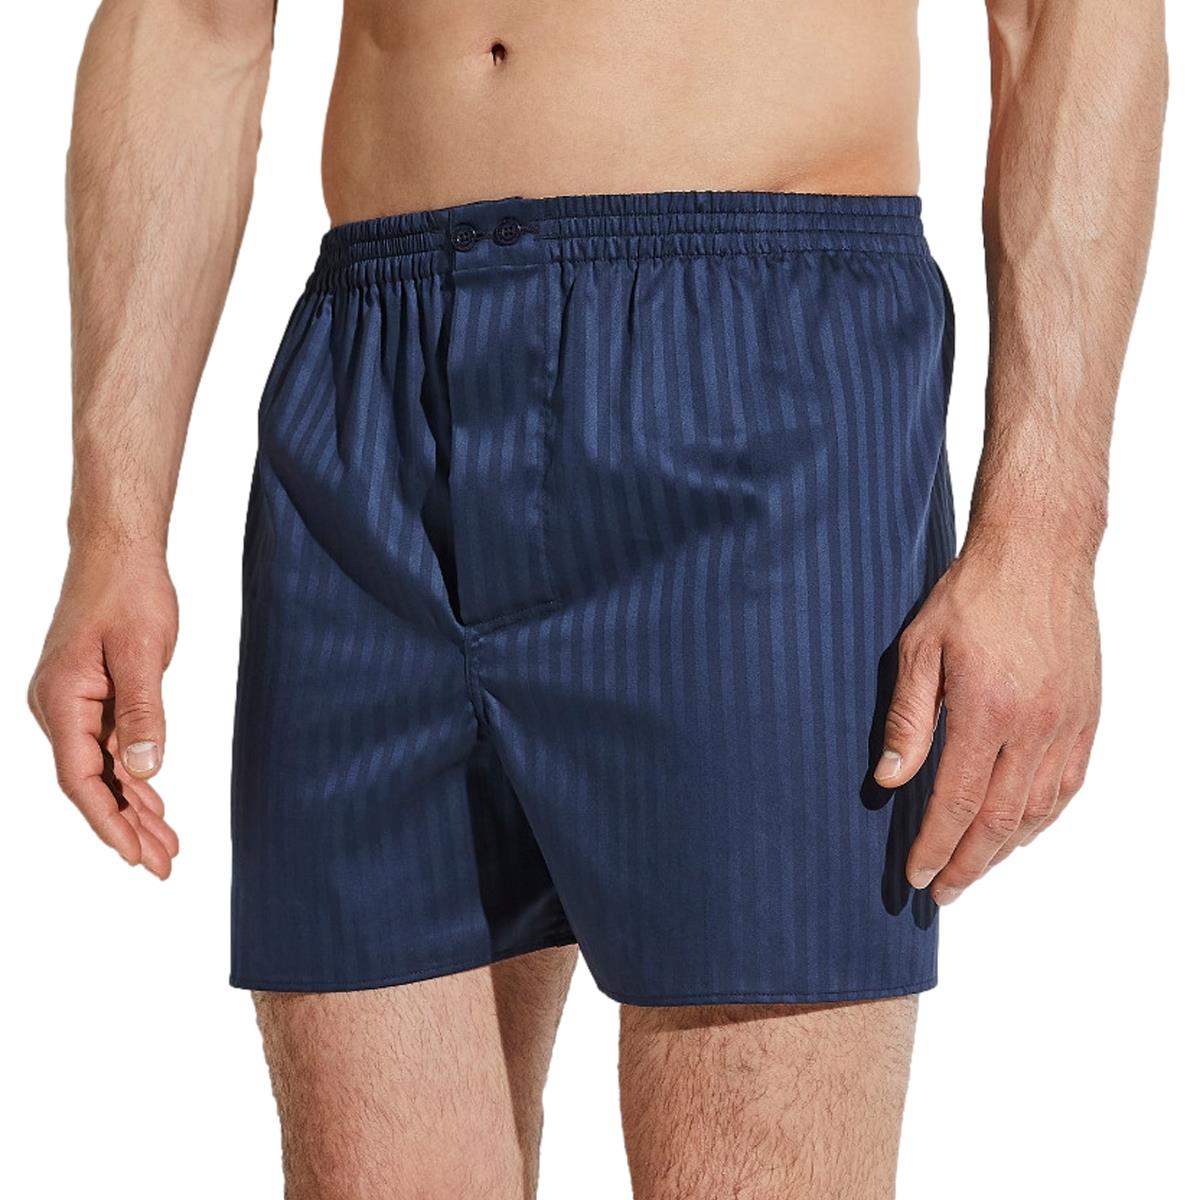 Pack Of 3 Navy Casual Boxer Briefs With Contrasting Waistband Black / Blue  / Dark Grey